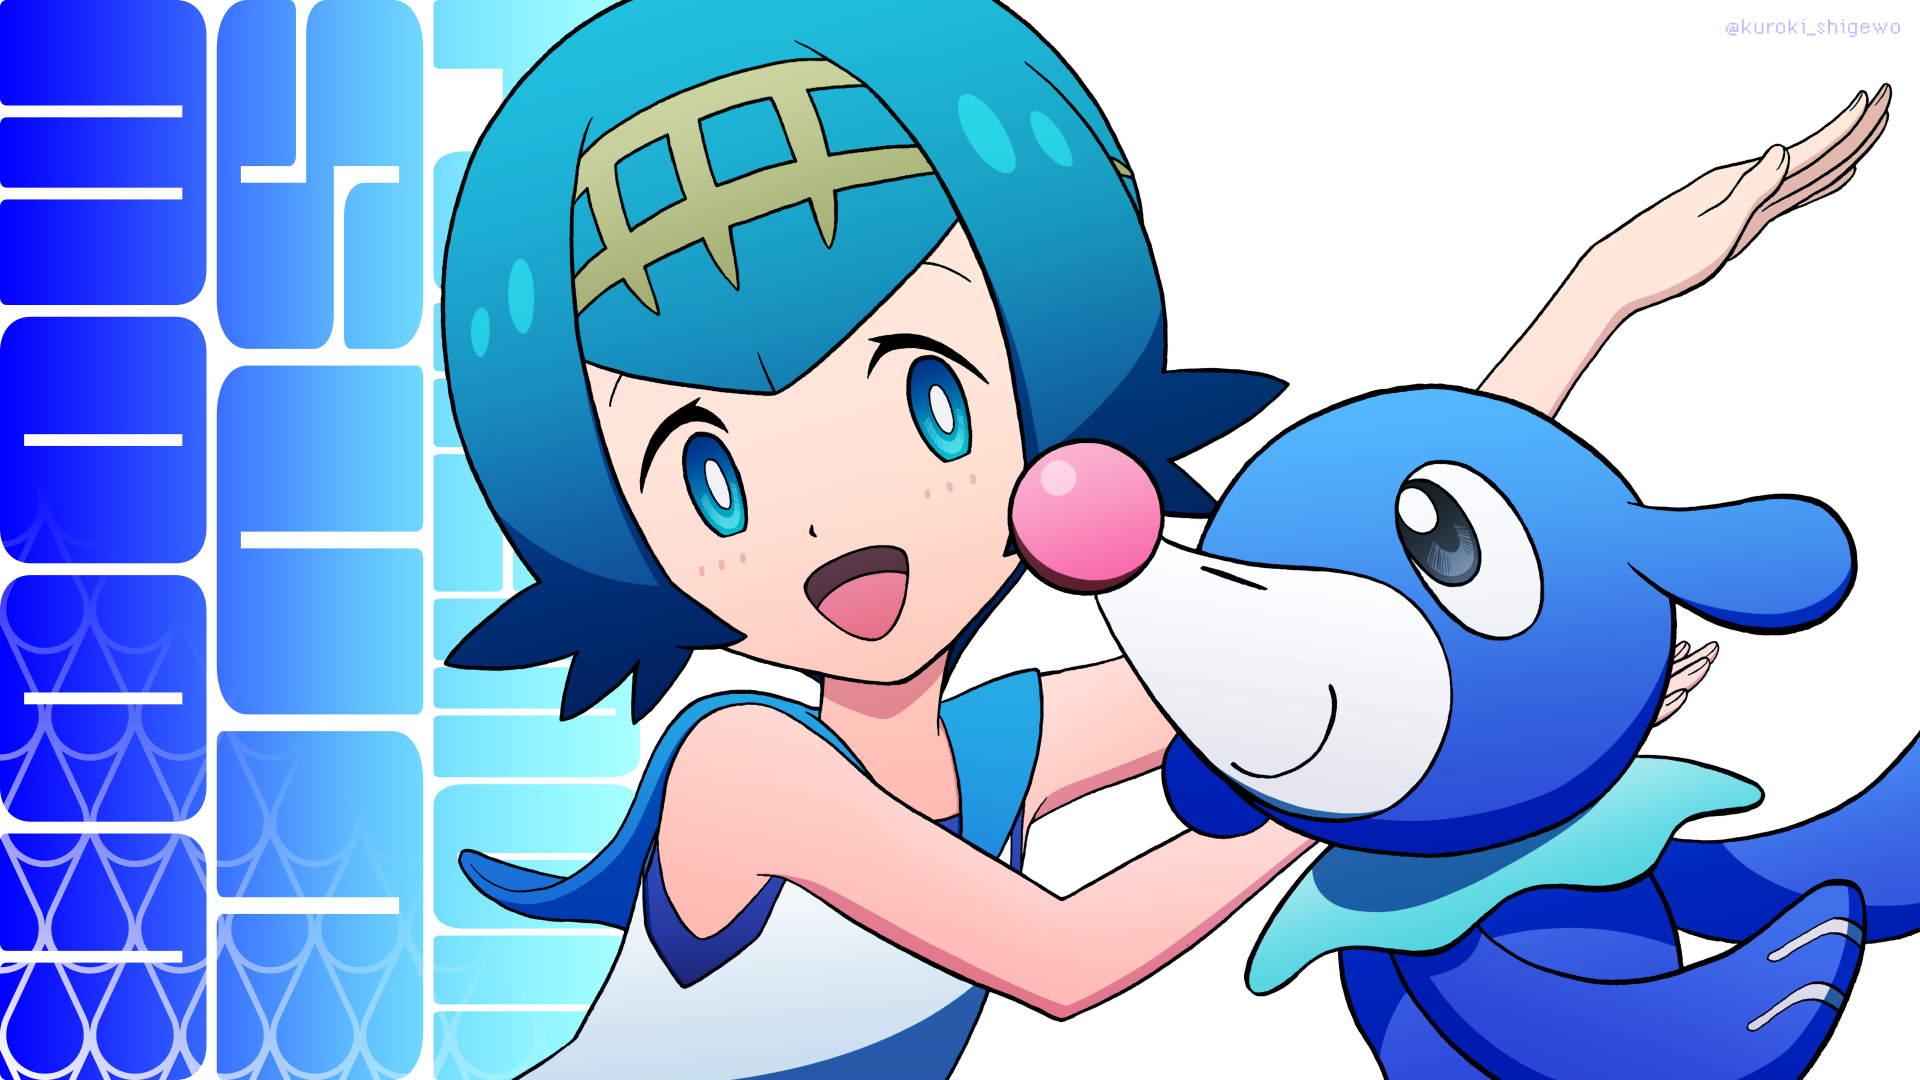 Shiny Mega Charizard - Ash VS Gladion! Lana's Popplio Evolves Into Brionne!  Tapu Fini! Check out the latest Pokemon Sun and Moon News here, along with  my thoughts! Shares appreciated c: #Gladion #